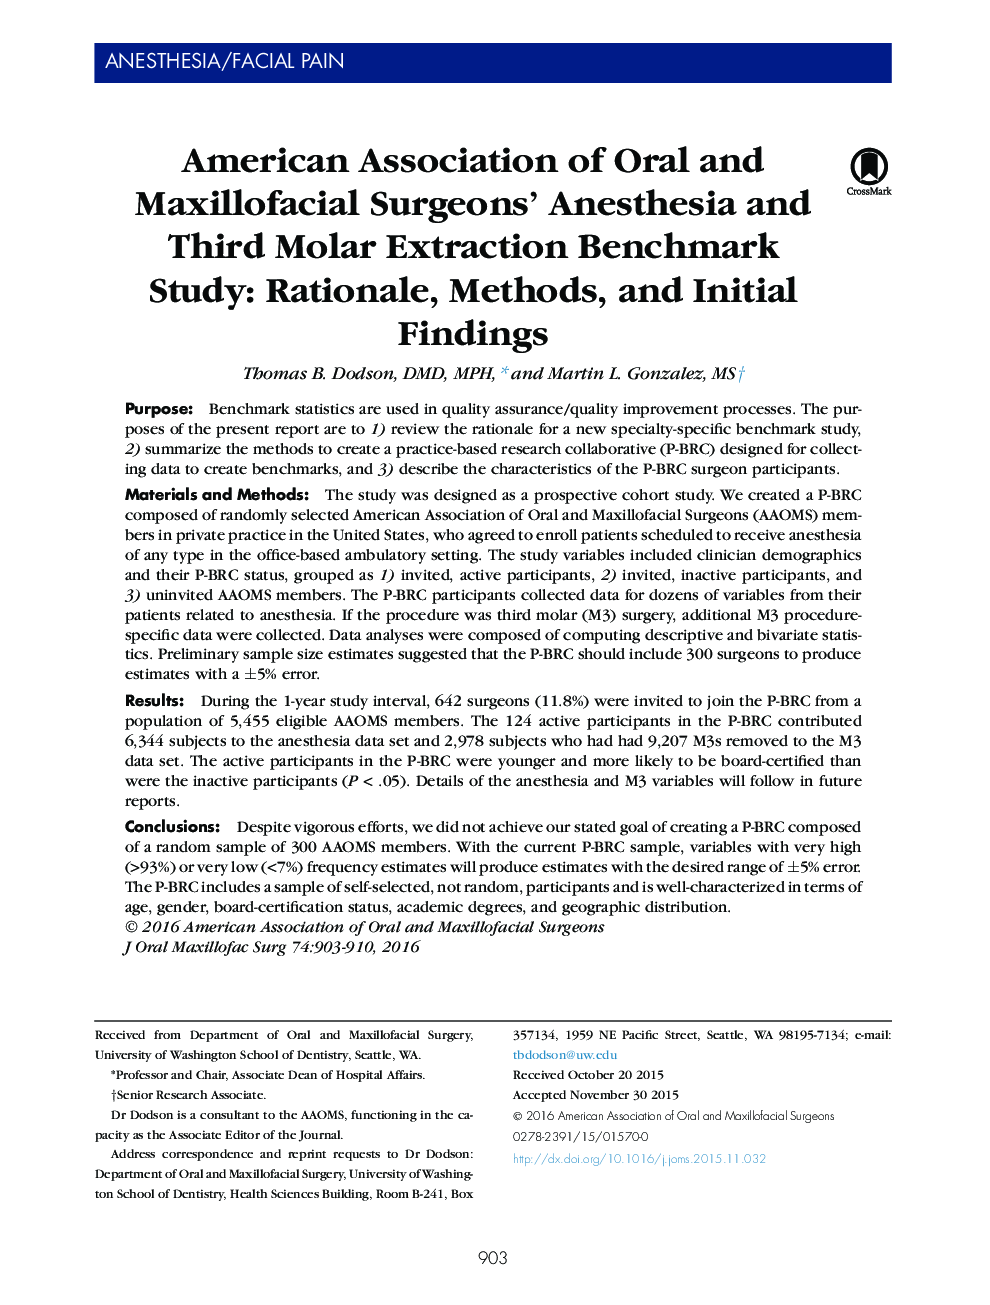 American Association of Oral and Maxillofacial Surgeons' Anesthesia and Third Molar Extraction Benchmark Study: Rationale, Methods, and Initial Findings